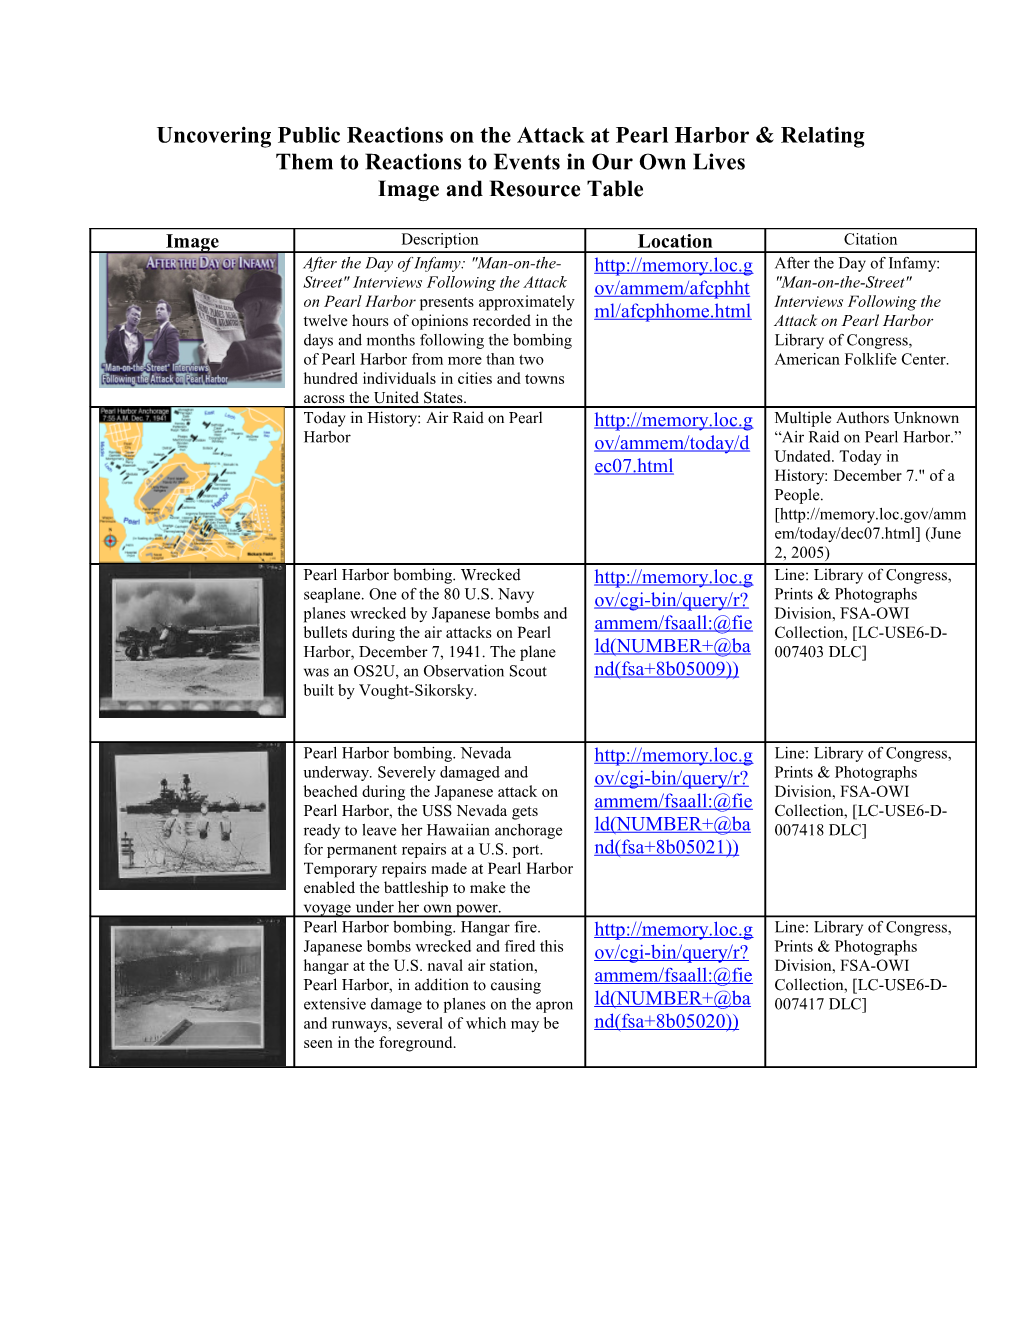 Uncovering Public Reactions on the Attack at Pearl Harbor & Relating Them to Reactions